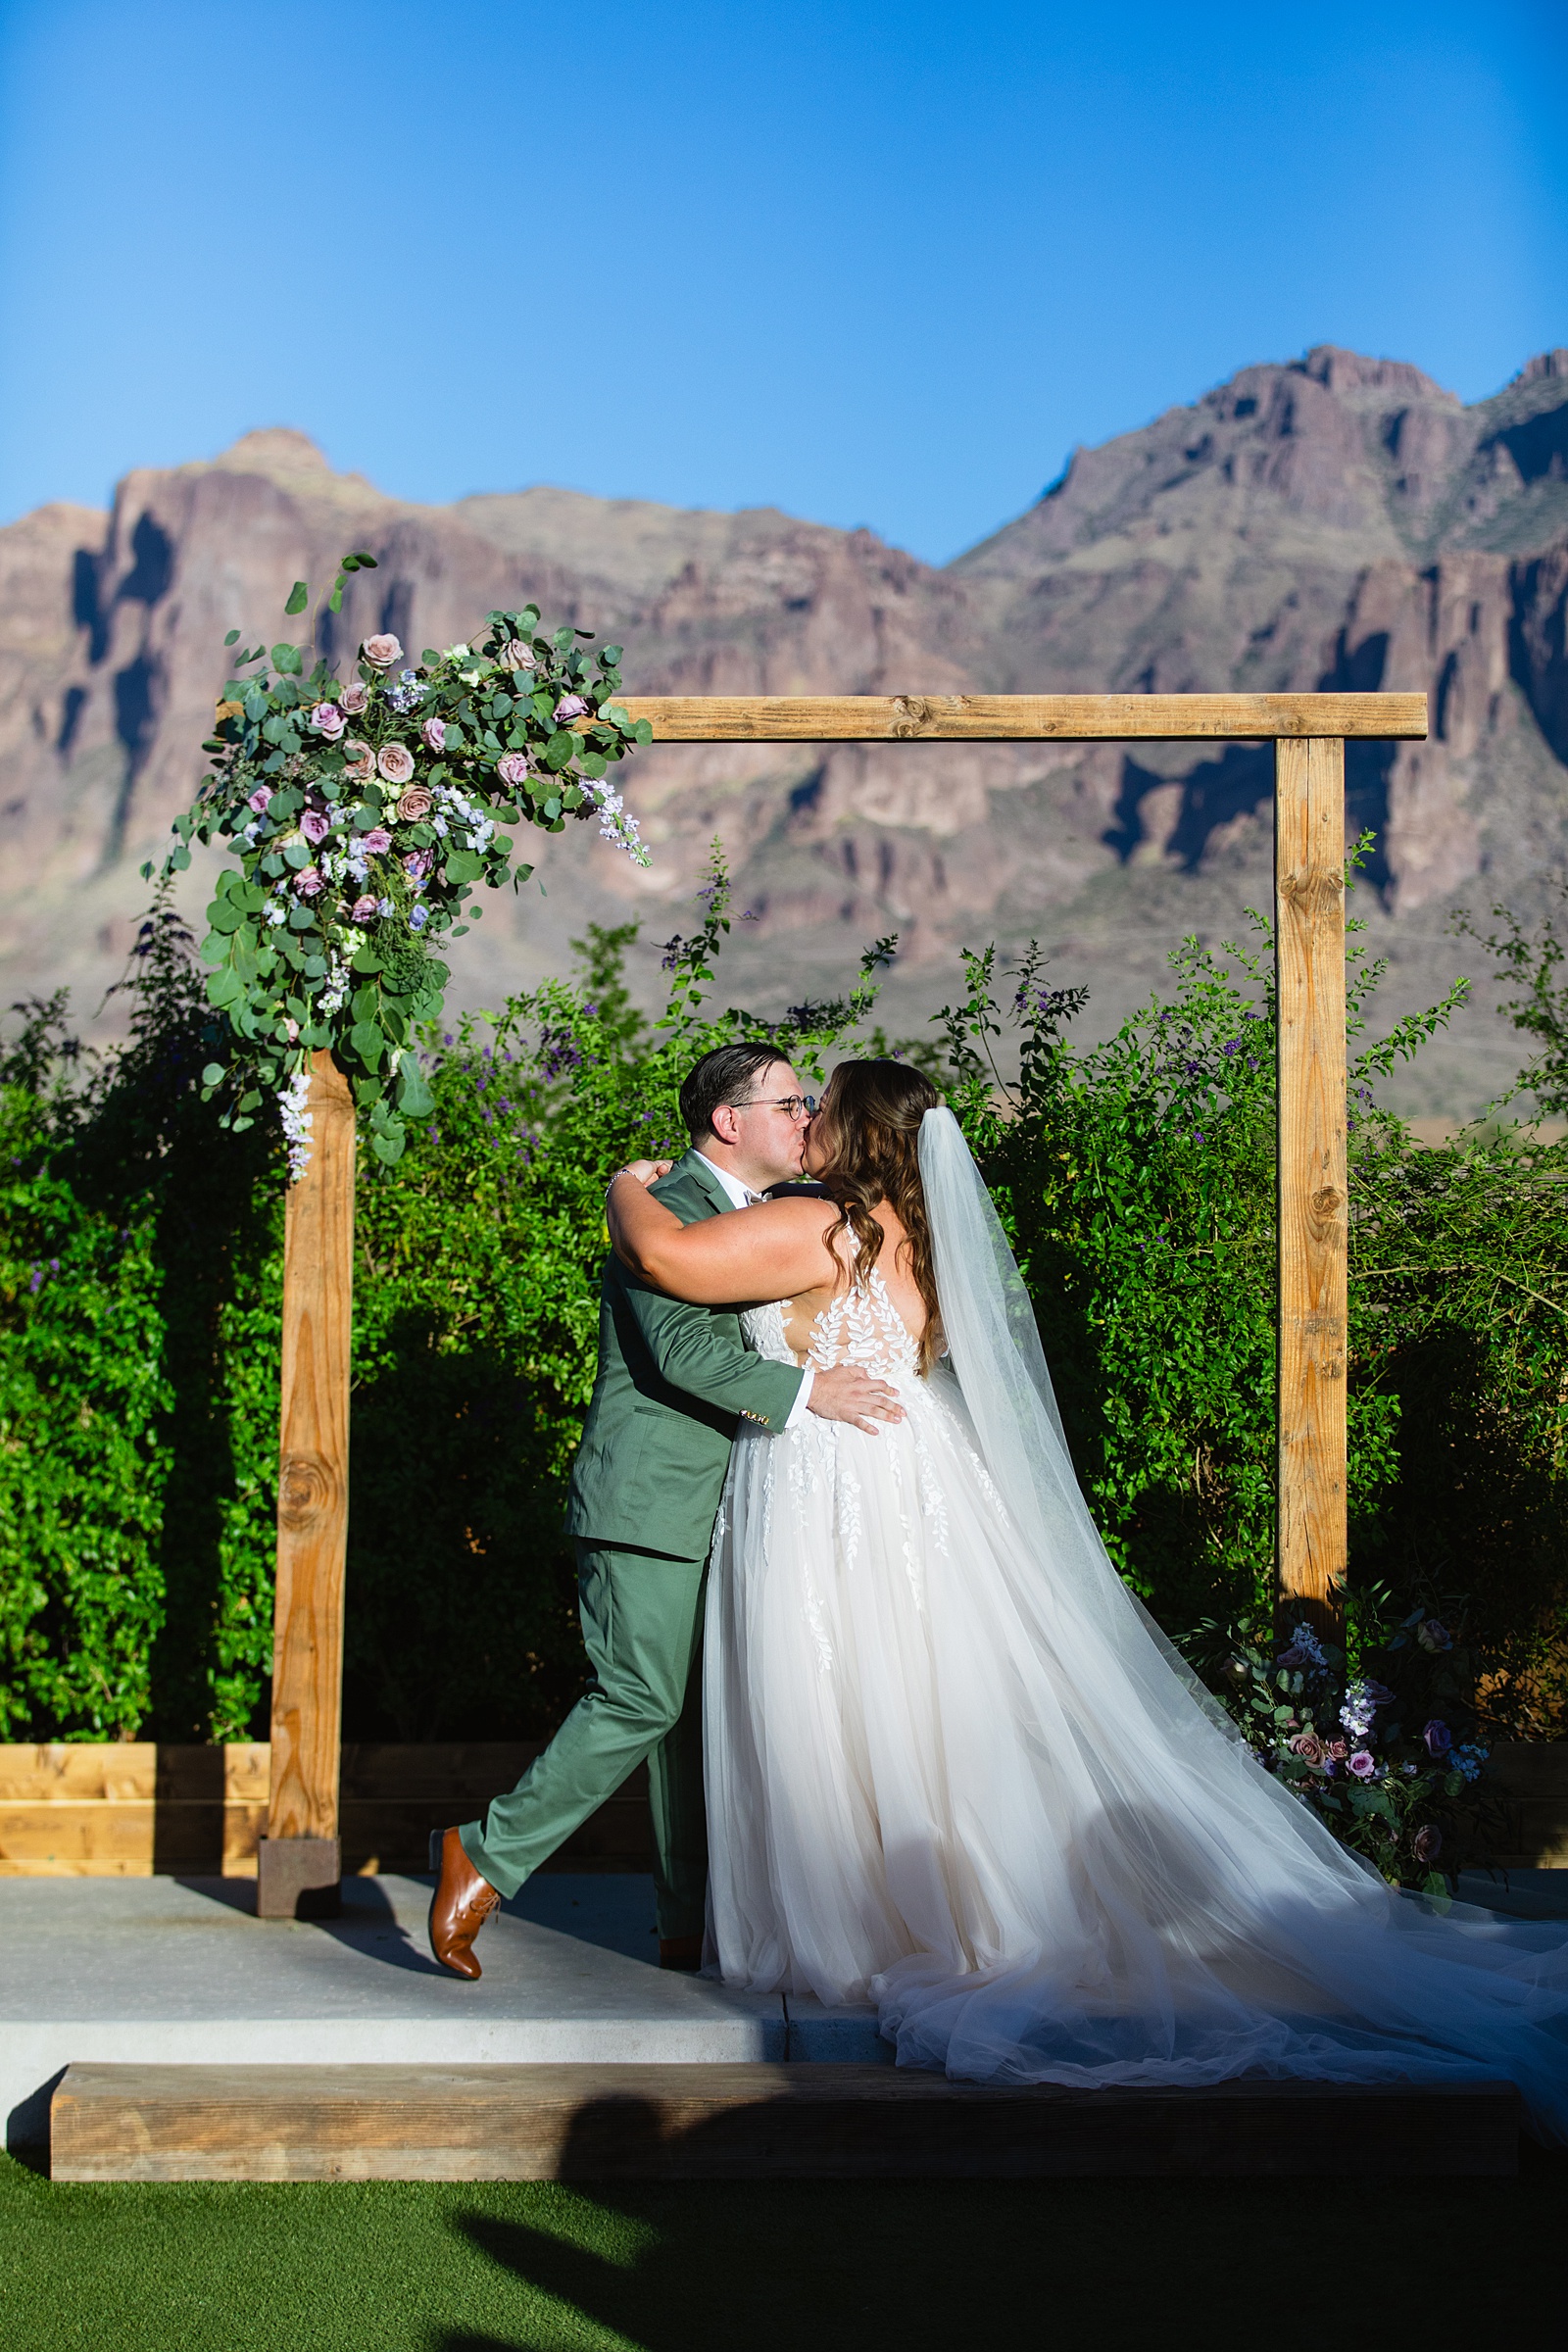 Bride & Groom share their first kiss during their wedding ceremony at a Phoenix desert intimate wedding by Arizona wedding photographer Juniper and Co Photography.